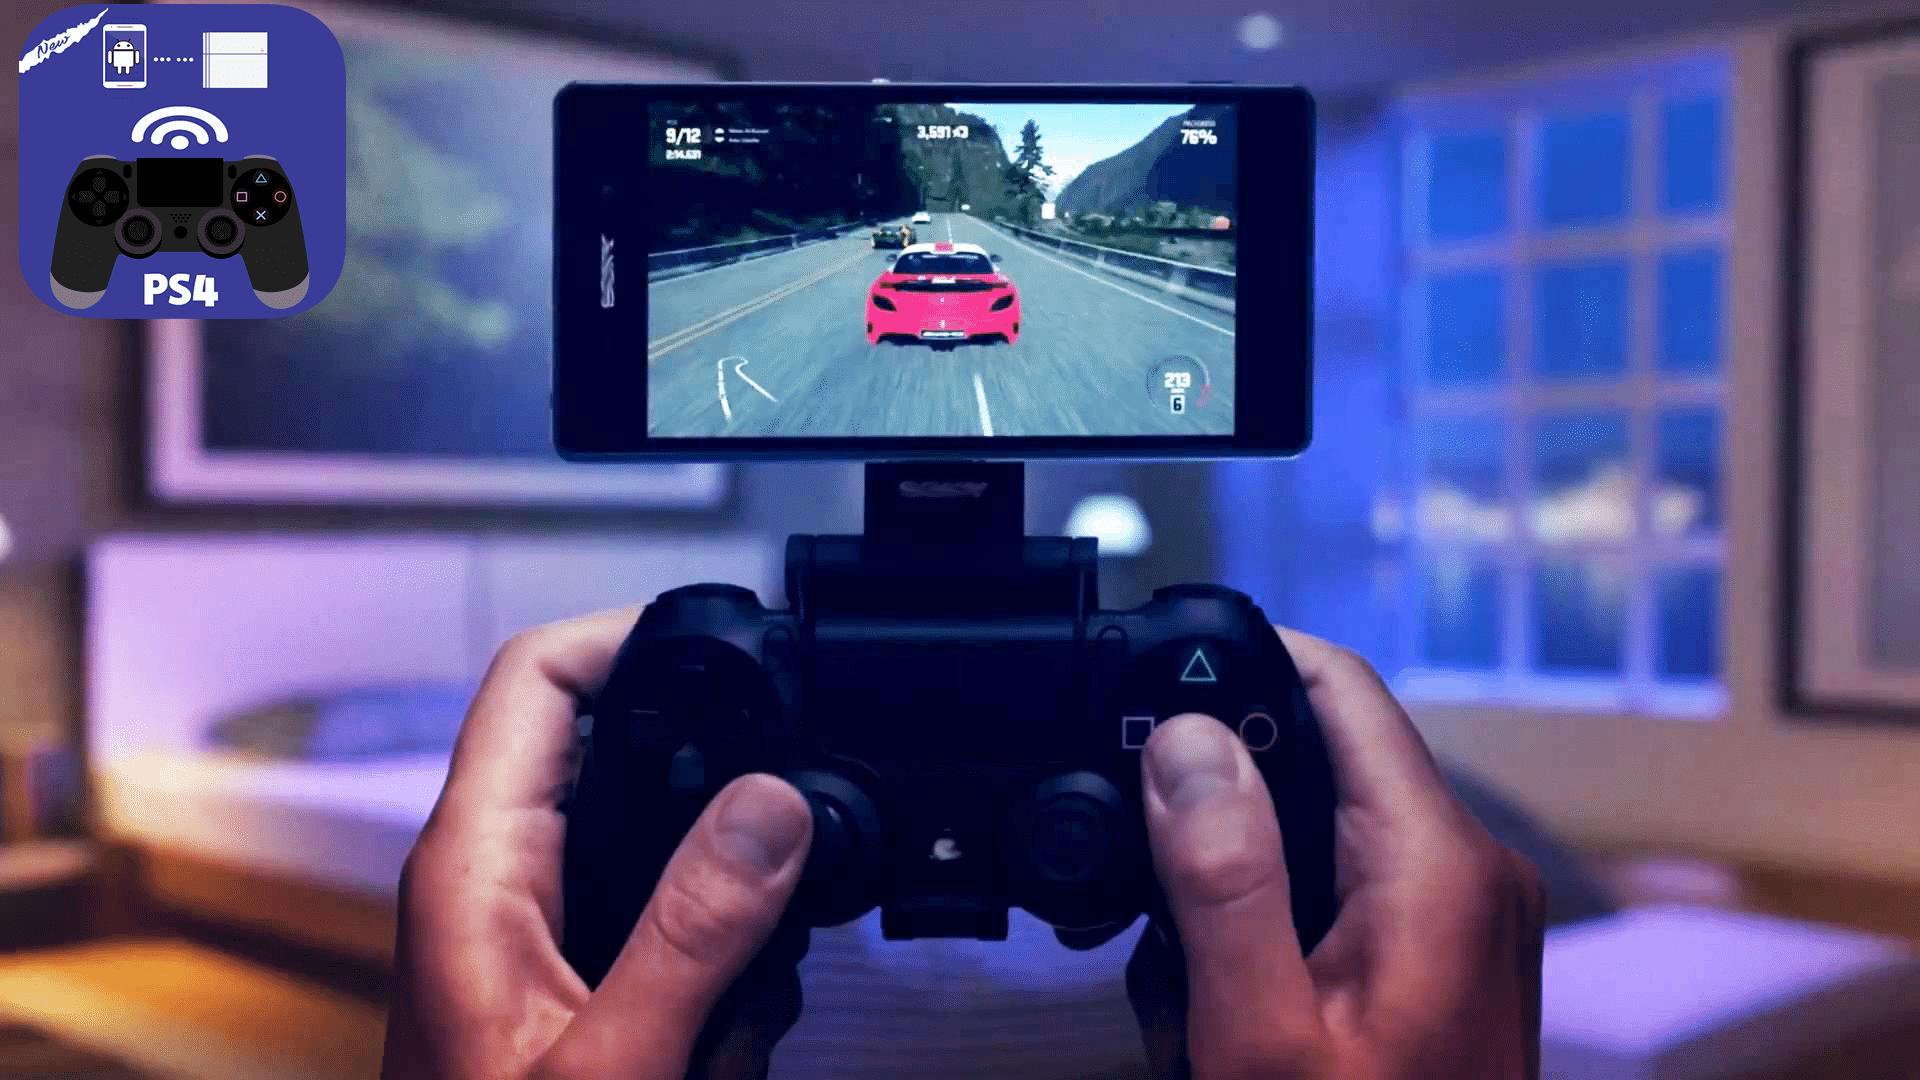 Play на телевизоре. Nintendo Switch ps4 Remote Play. Sony Remote Play. Смартфон Sony 4 ps4. Ps5 Remote Play.